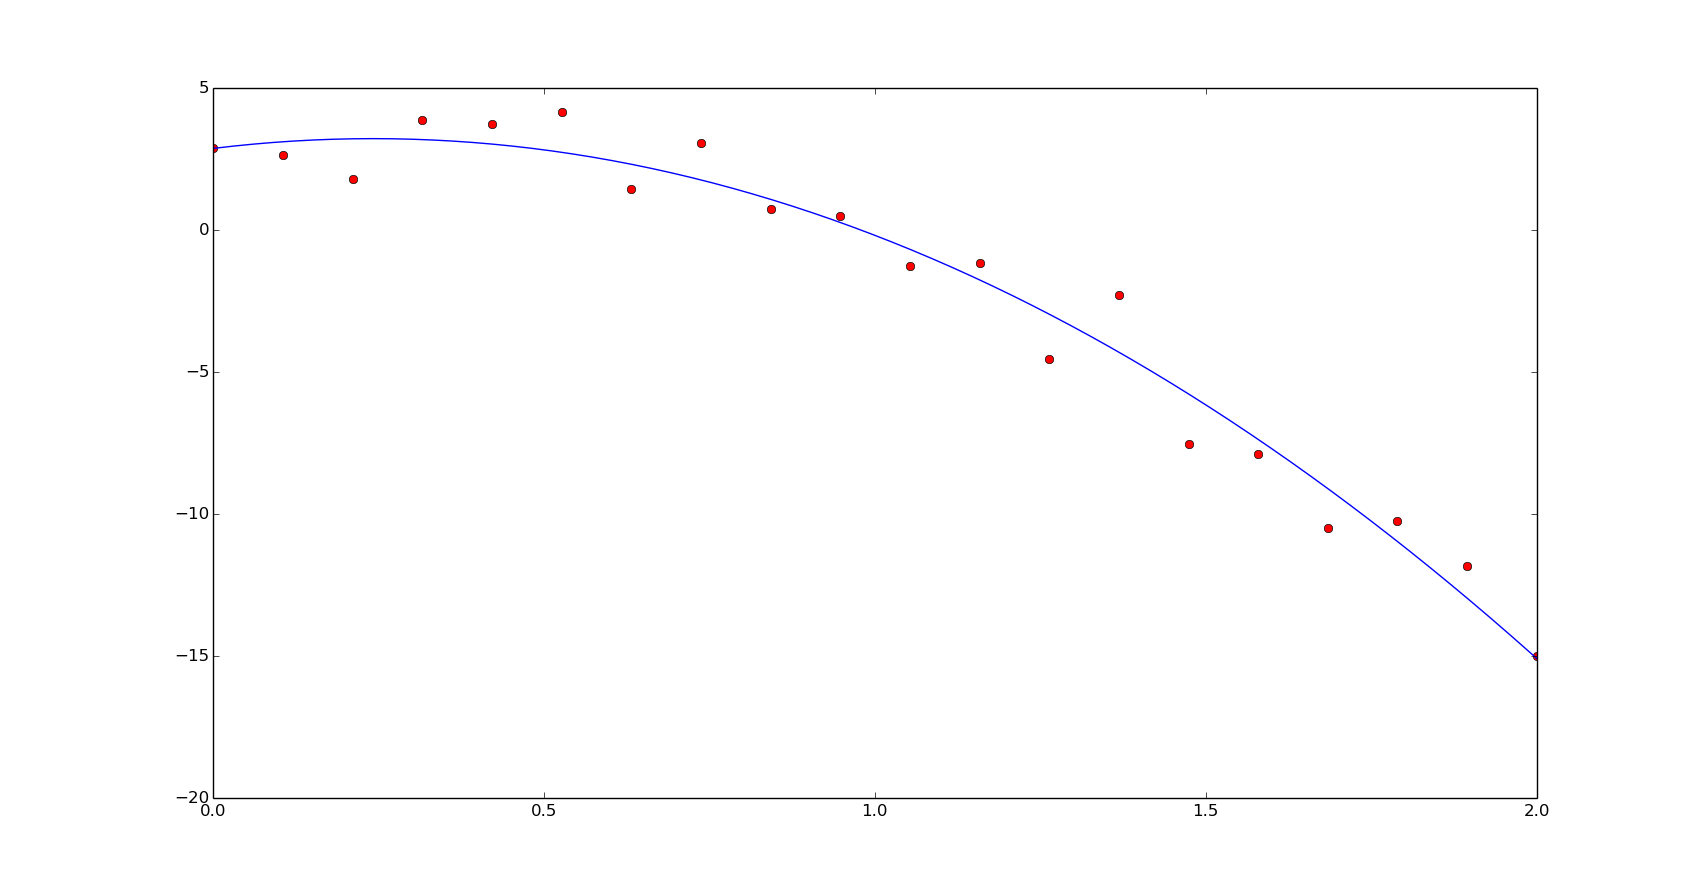 Polynomial function data non-linear fit